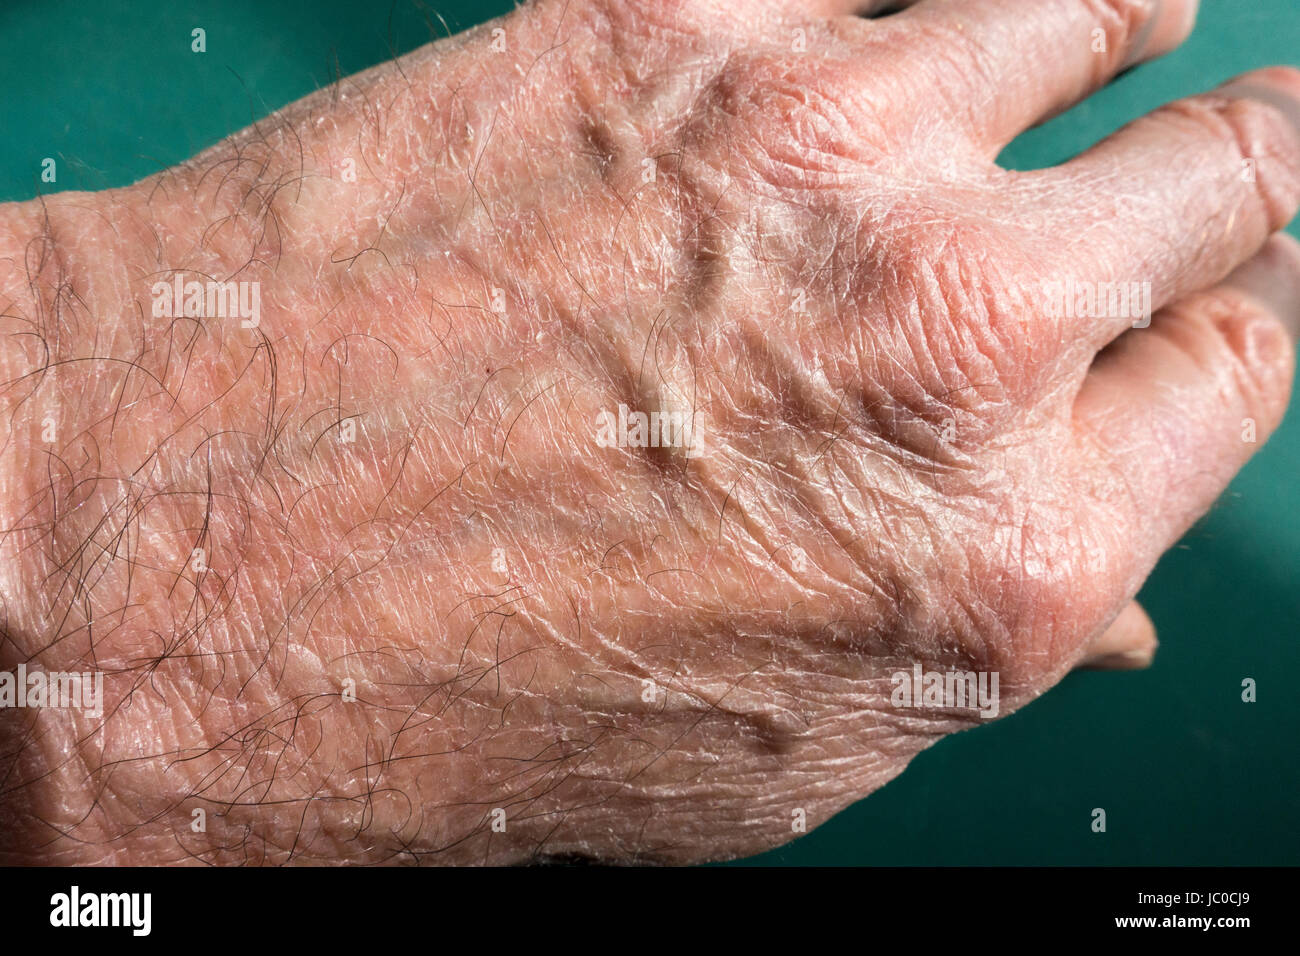 Vein pattern and hairs on back of human hand. Stock Photo